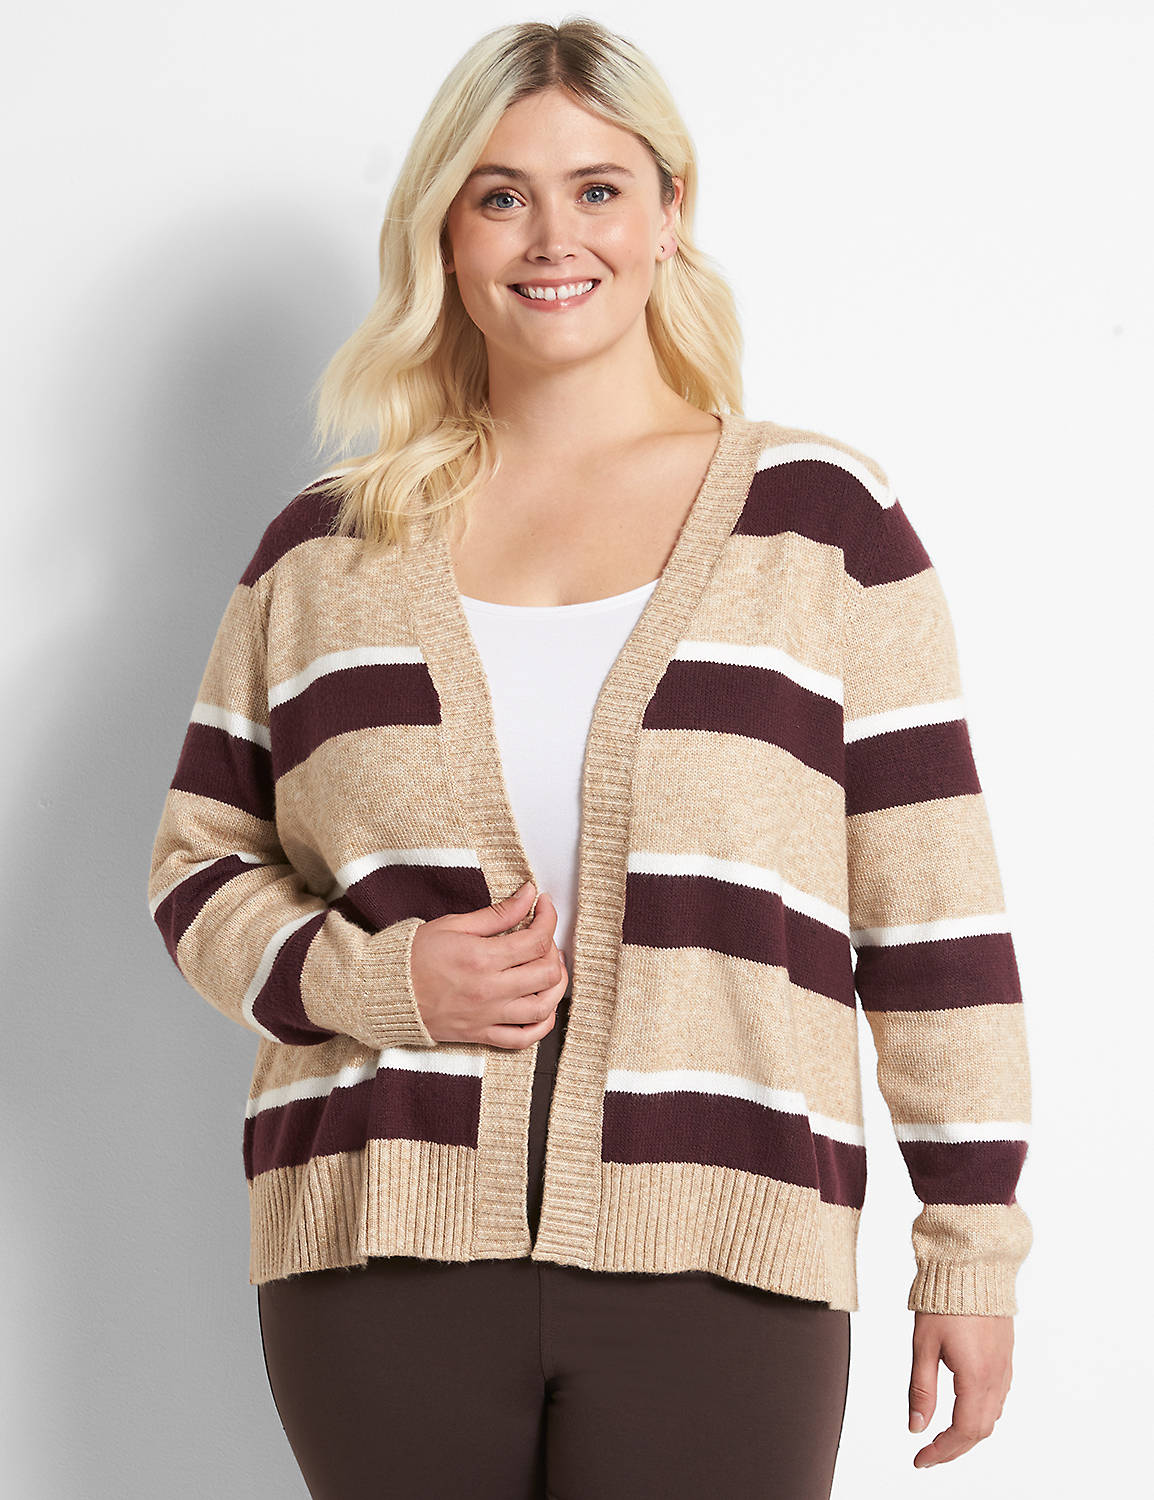 Long Sleeve Open Front Striped Cardigan 1122359:Camel Heather B0221:10/12 Product Image 1